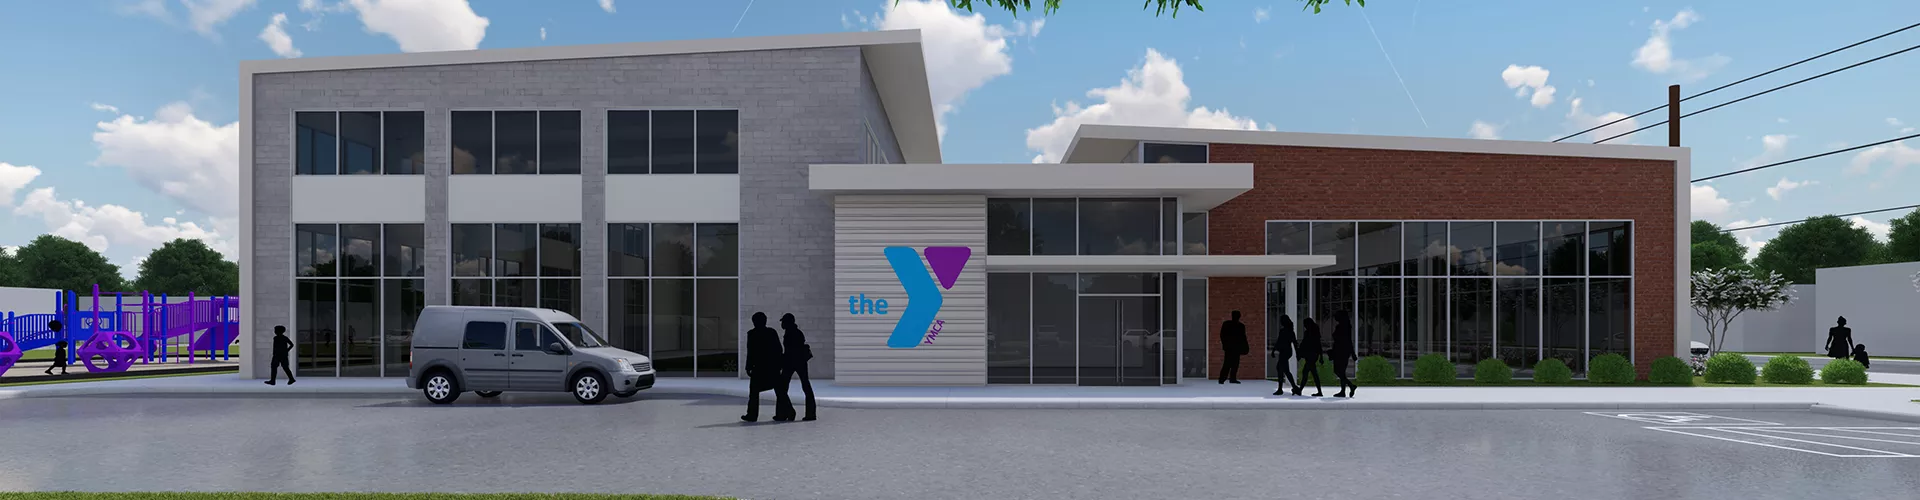 Dallas, TX: New Youth & Family center opens in South Oak Cliff